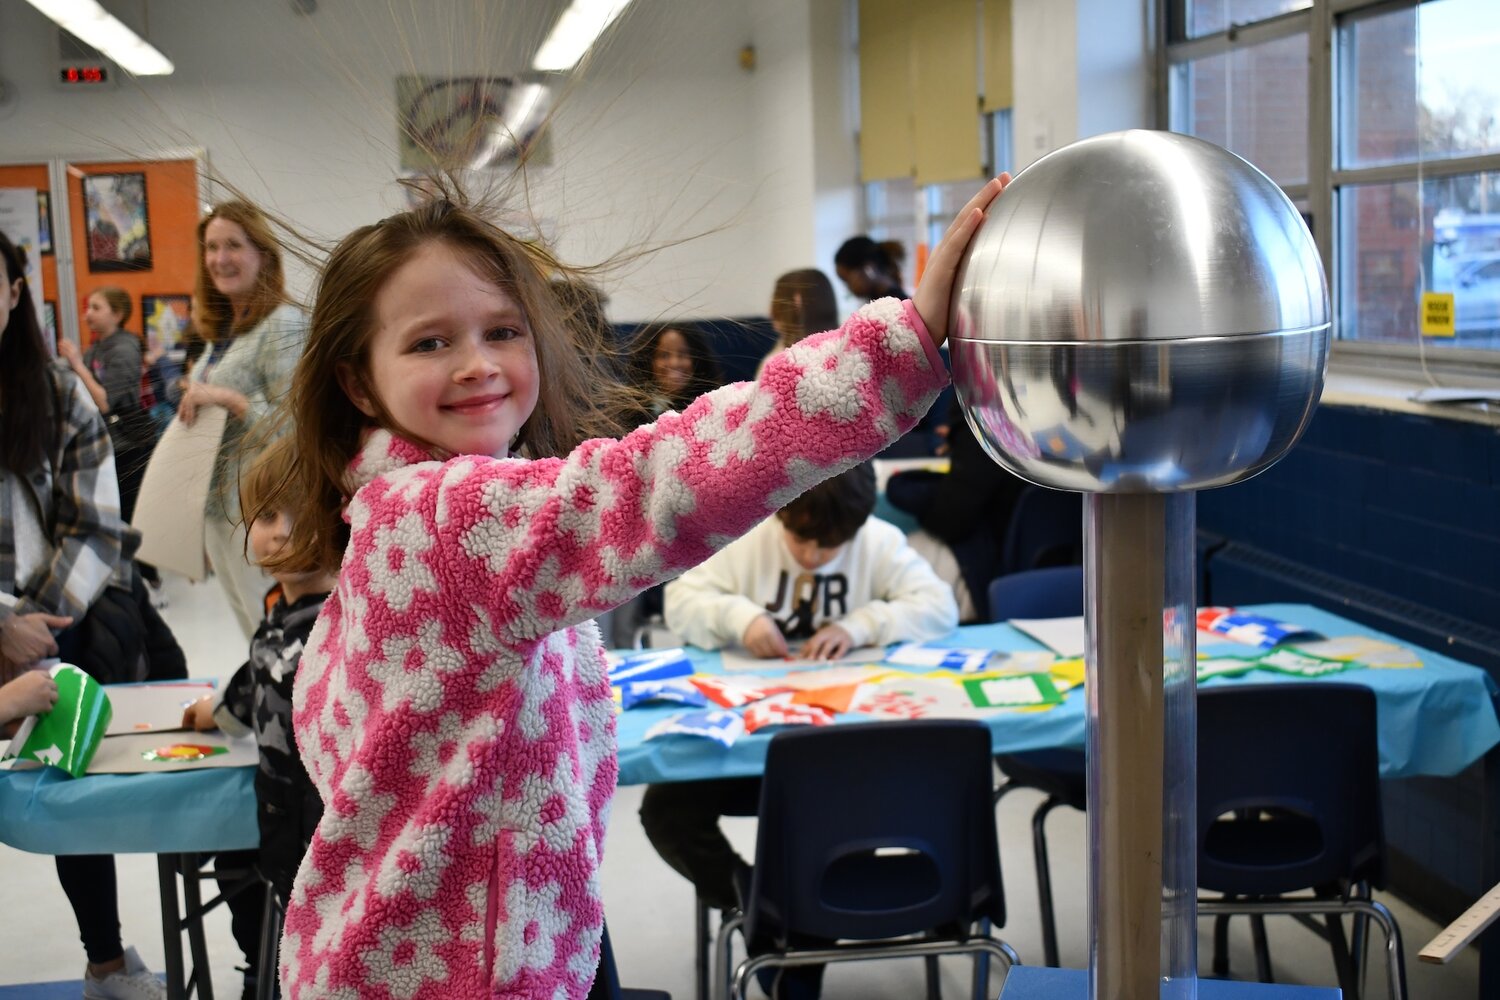 Malverne Students Come Together to Celebrate Science at STEM Night hosted by Herald Community Newspapers